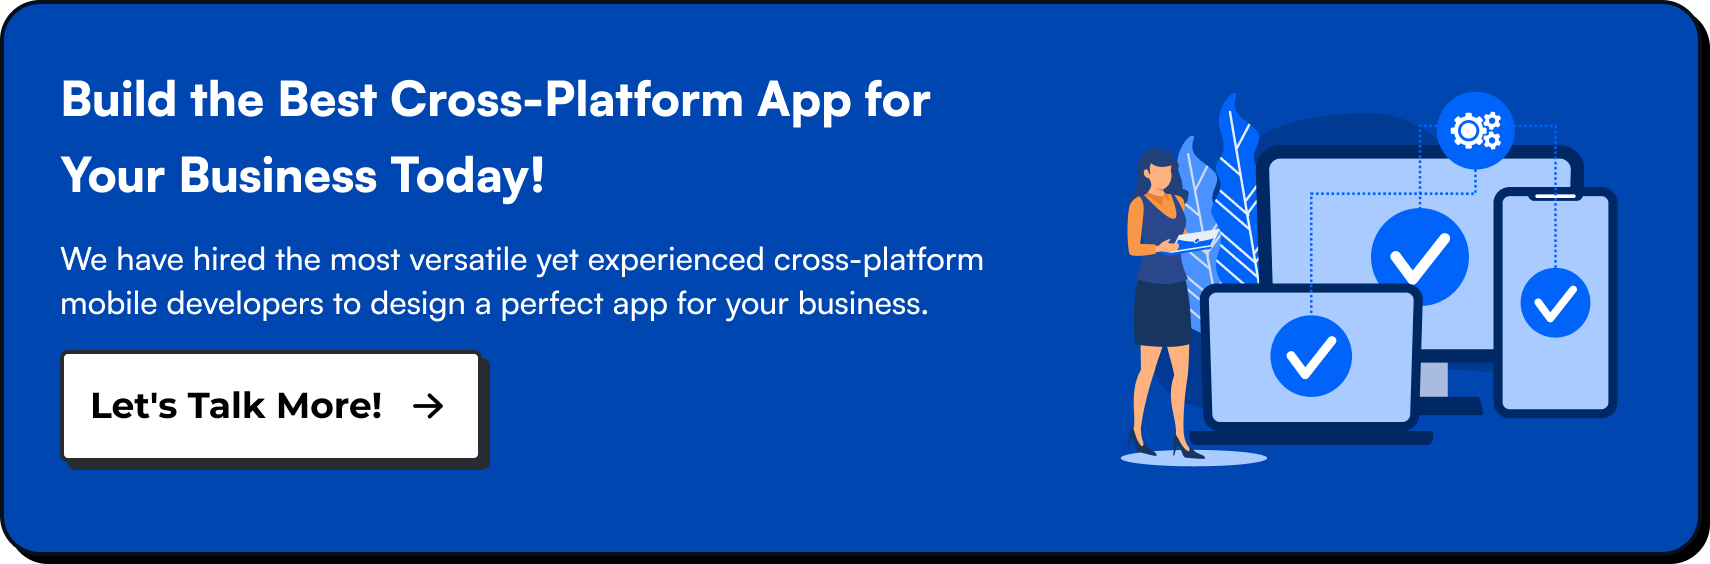 Build the Best Cross-Platform App for Your Business Today. We have hired the most versatile yet experienced cross-platform mobile developers to design a perfect app for your business. Let's talk more!